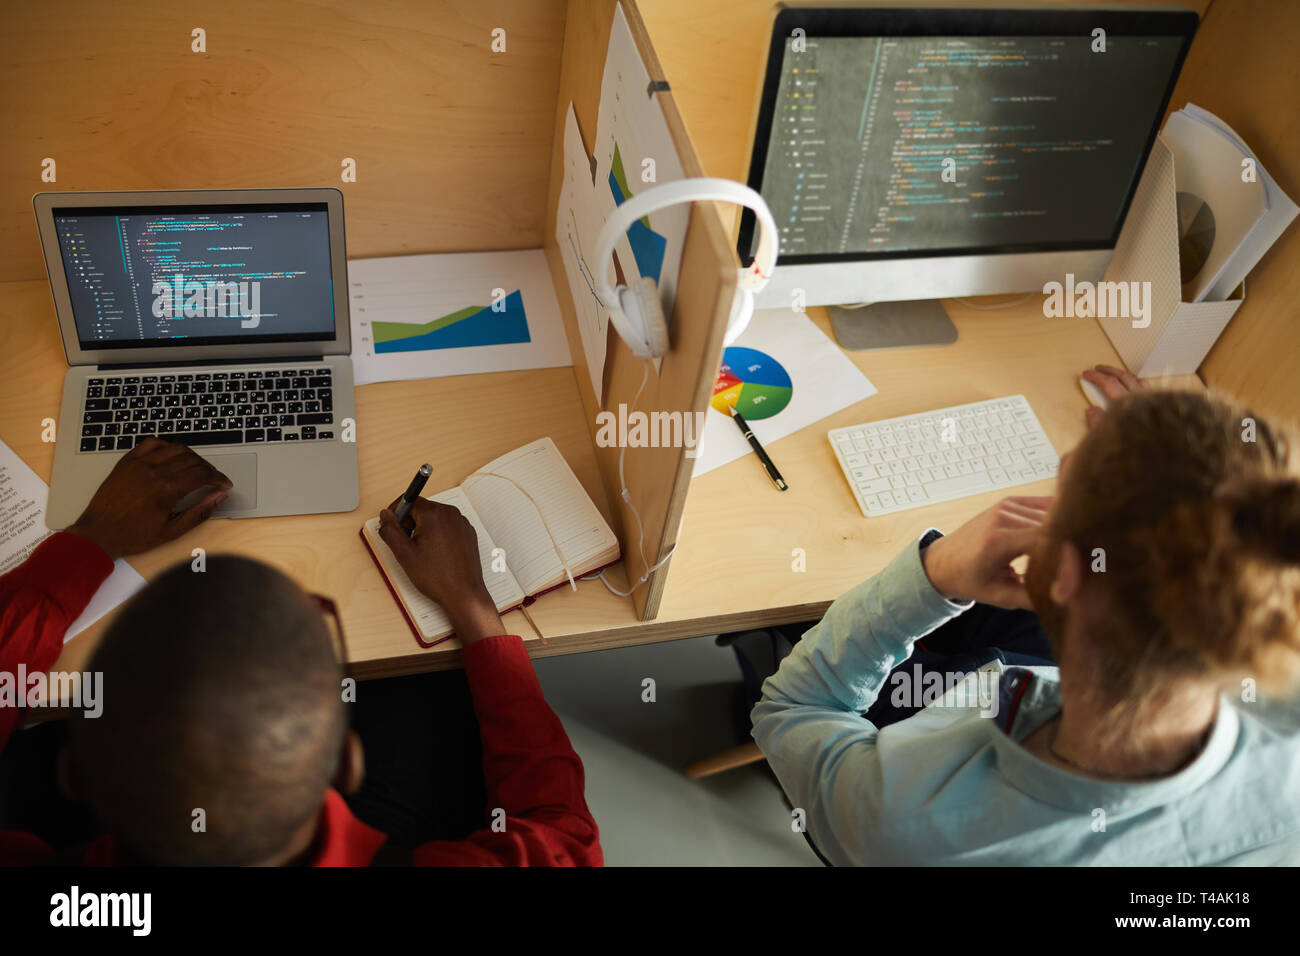 IT Developers at Workplace Stock Photo